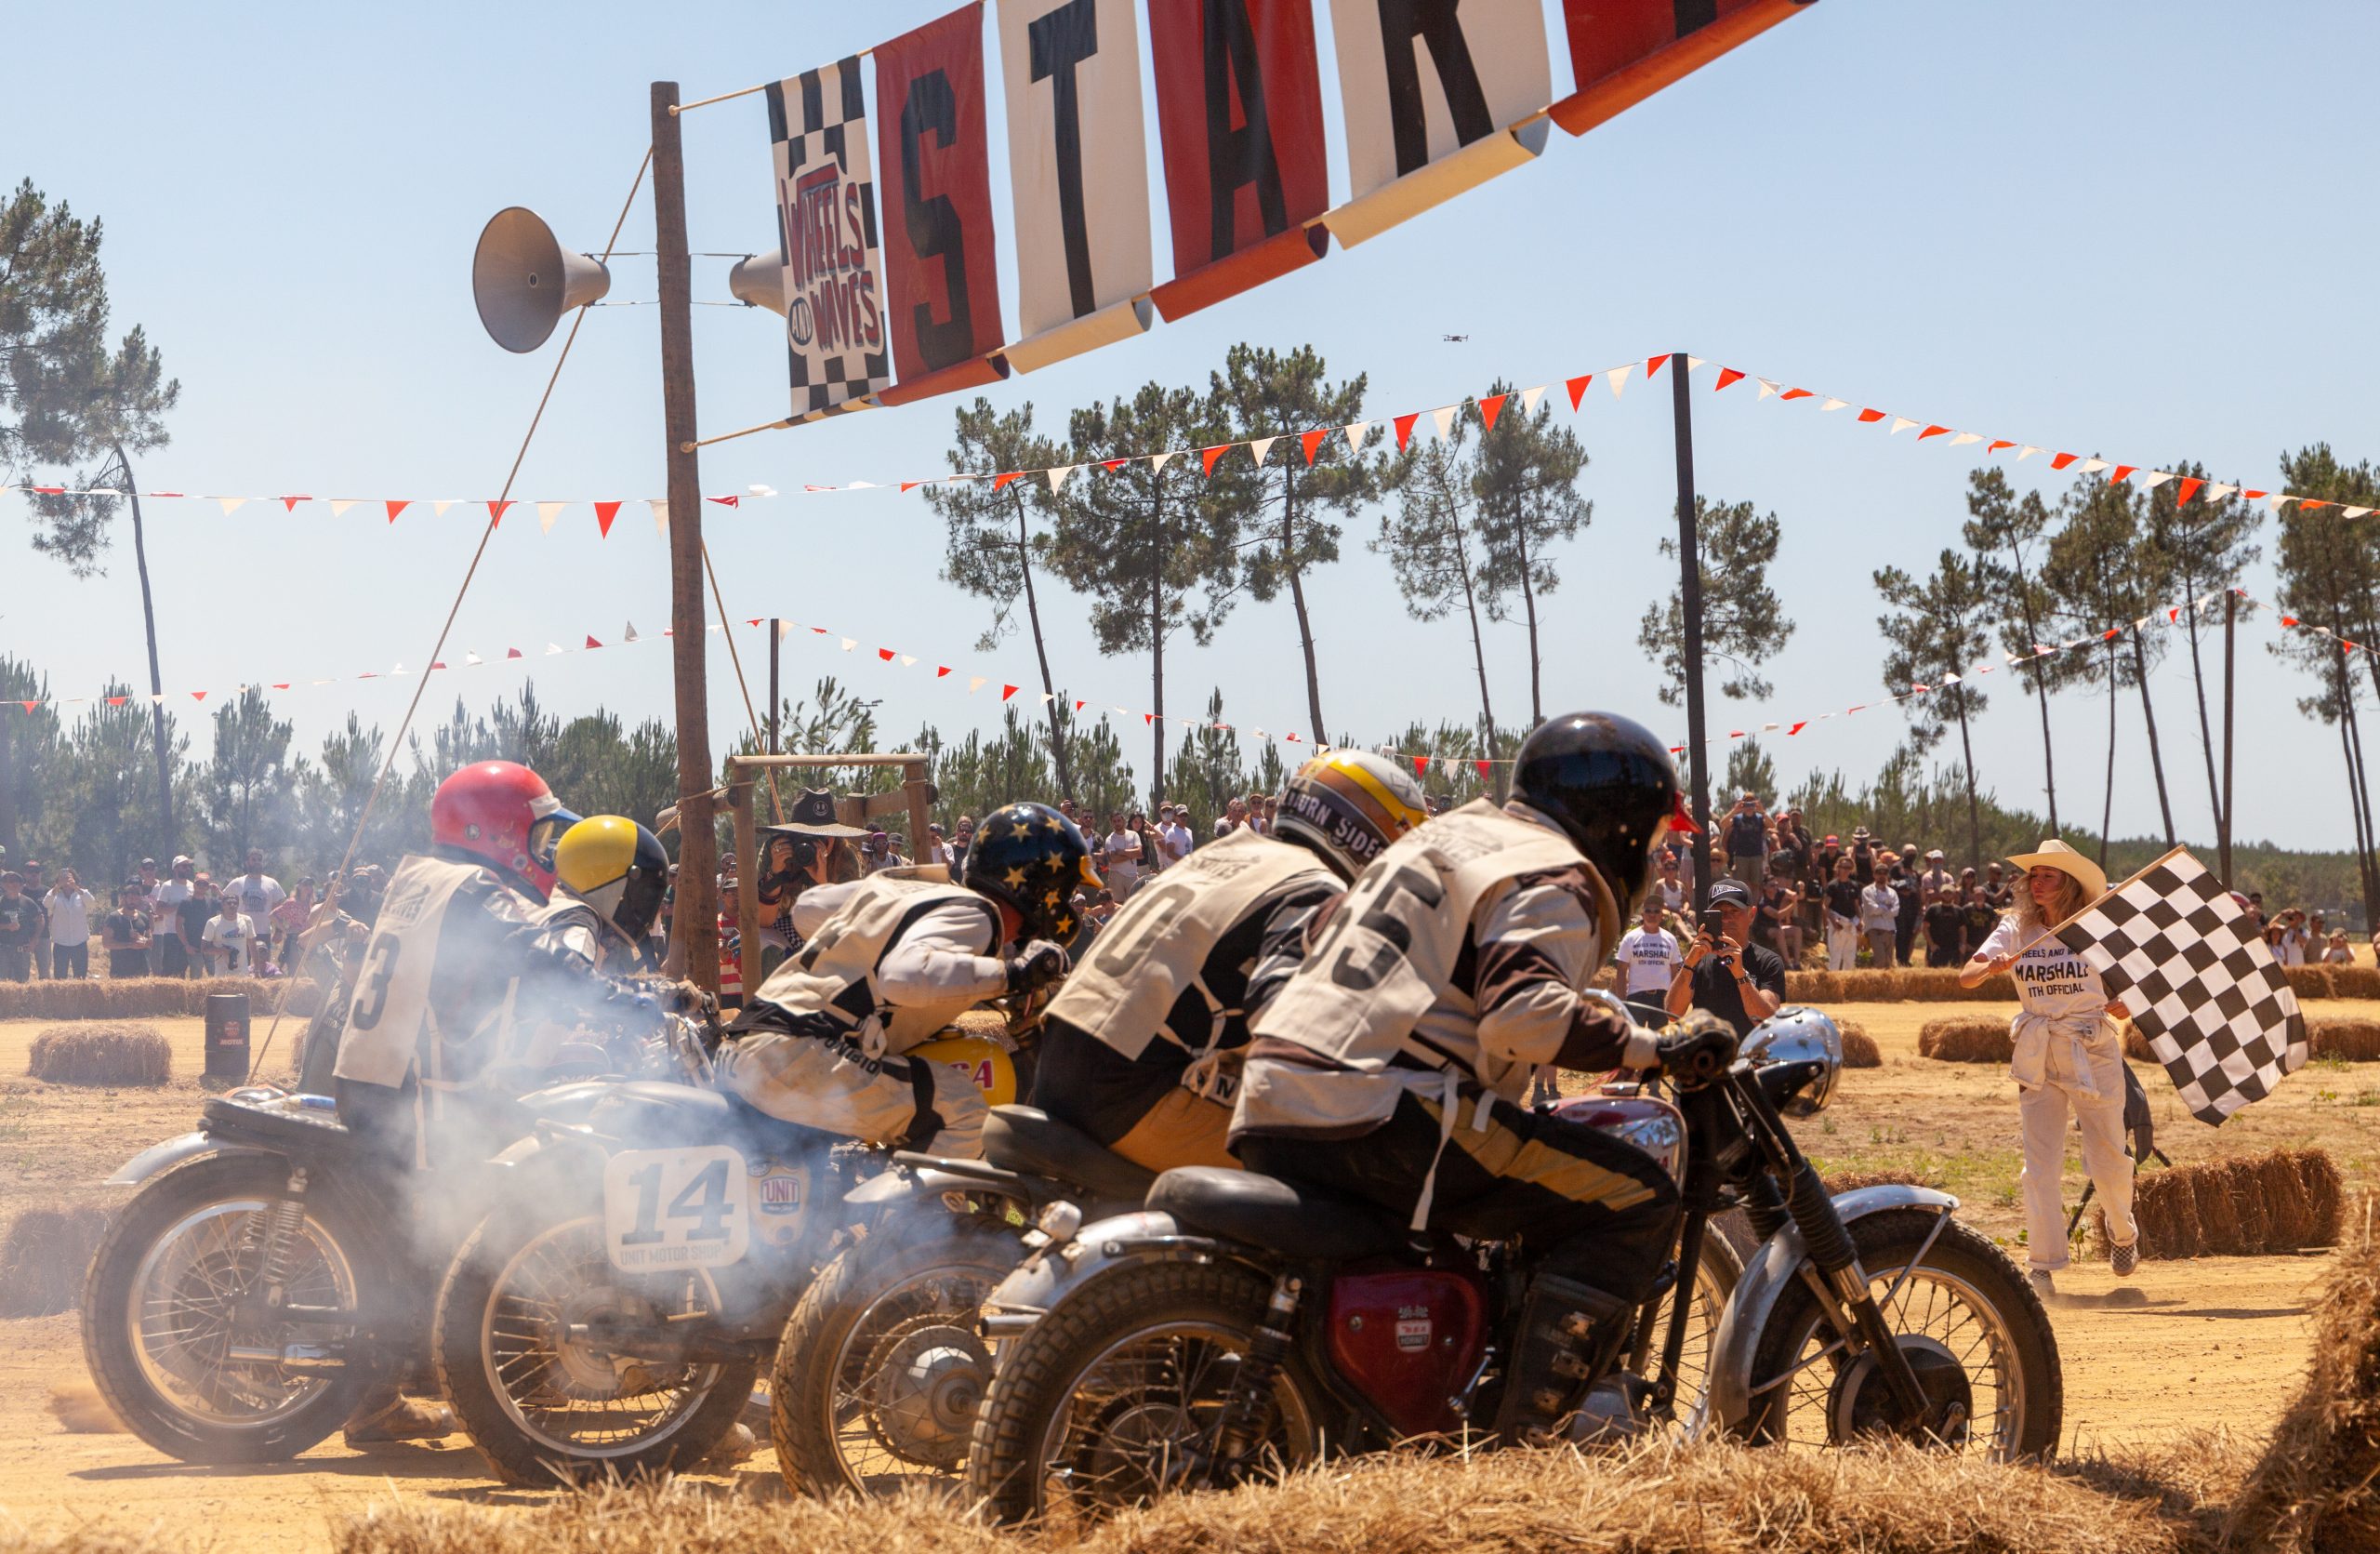 I’ve found biker heaven: Riding the dunes at Wheels and Waves